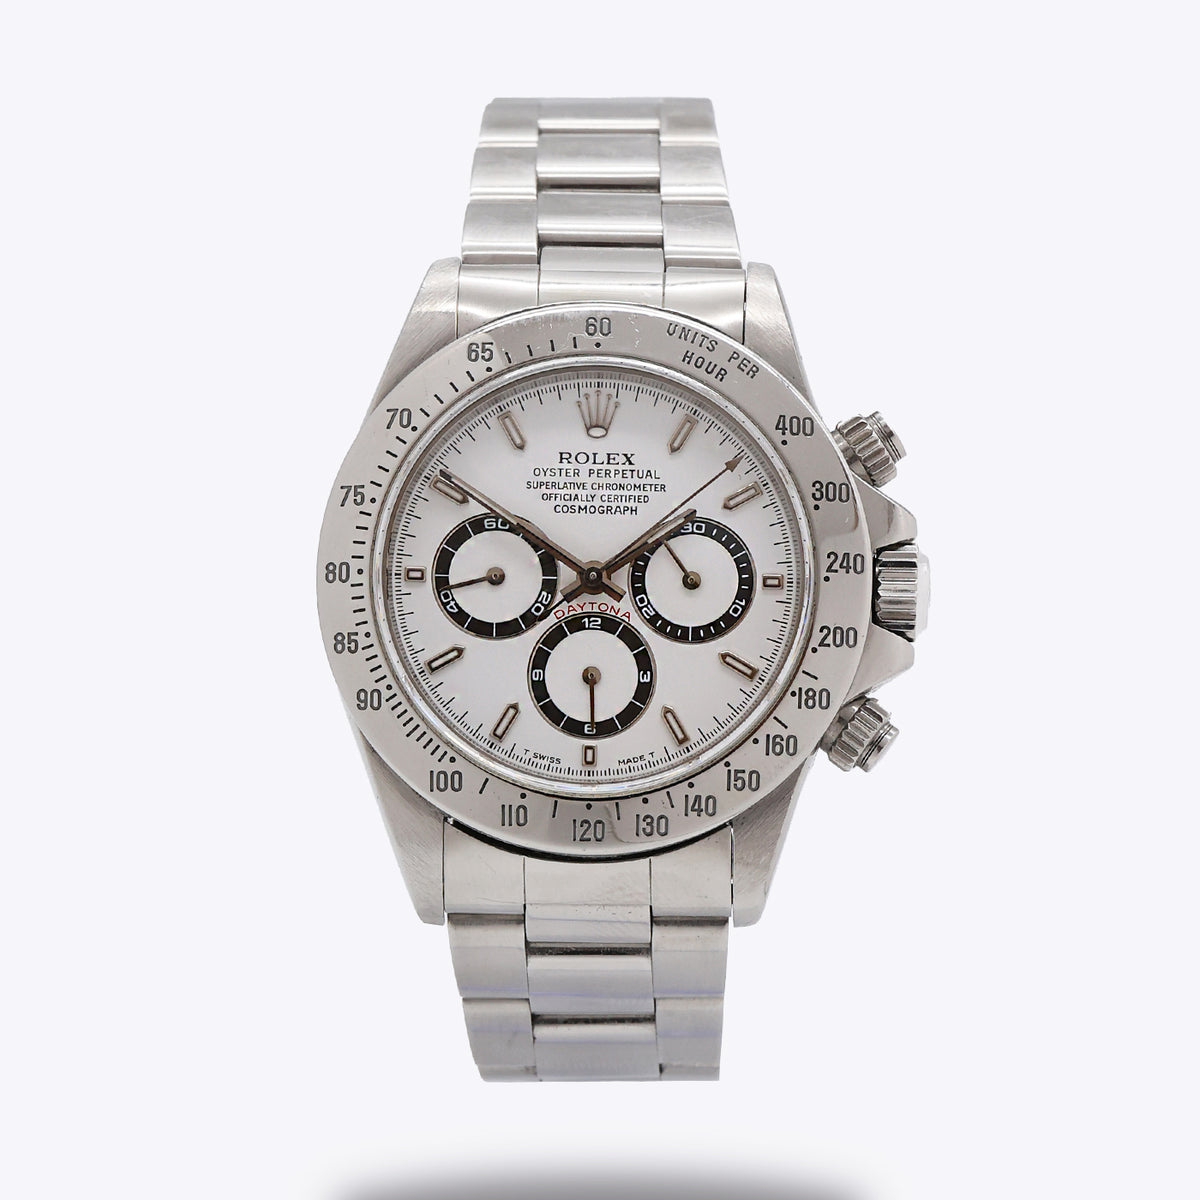 1997 Rolex Daytona White Dial U Series Ref.16520 (with boxes and booklets)